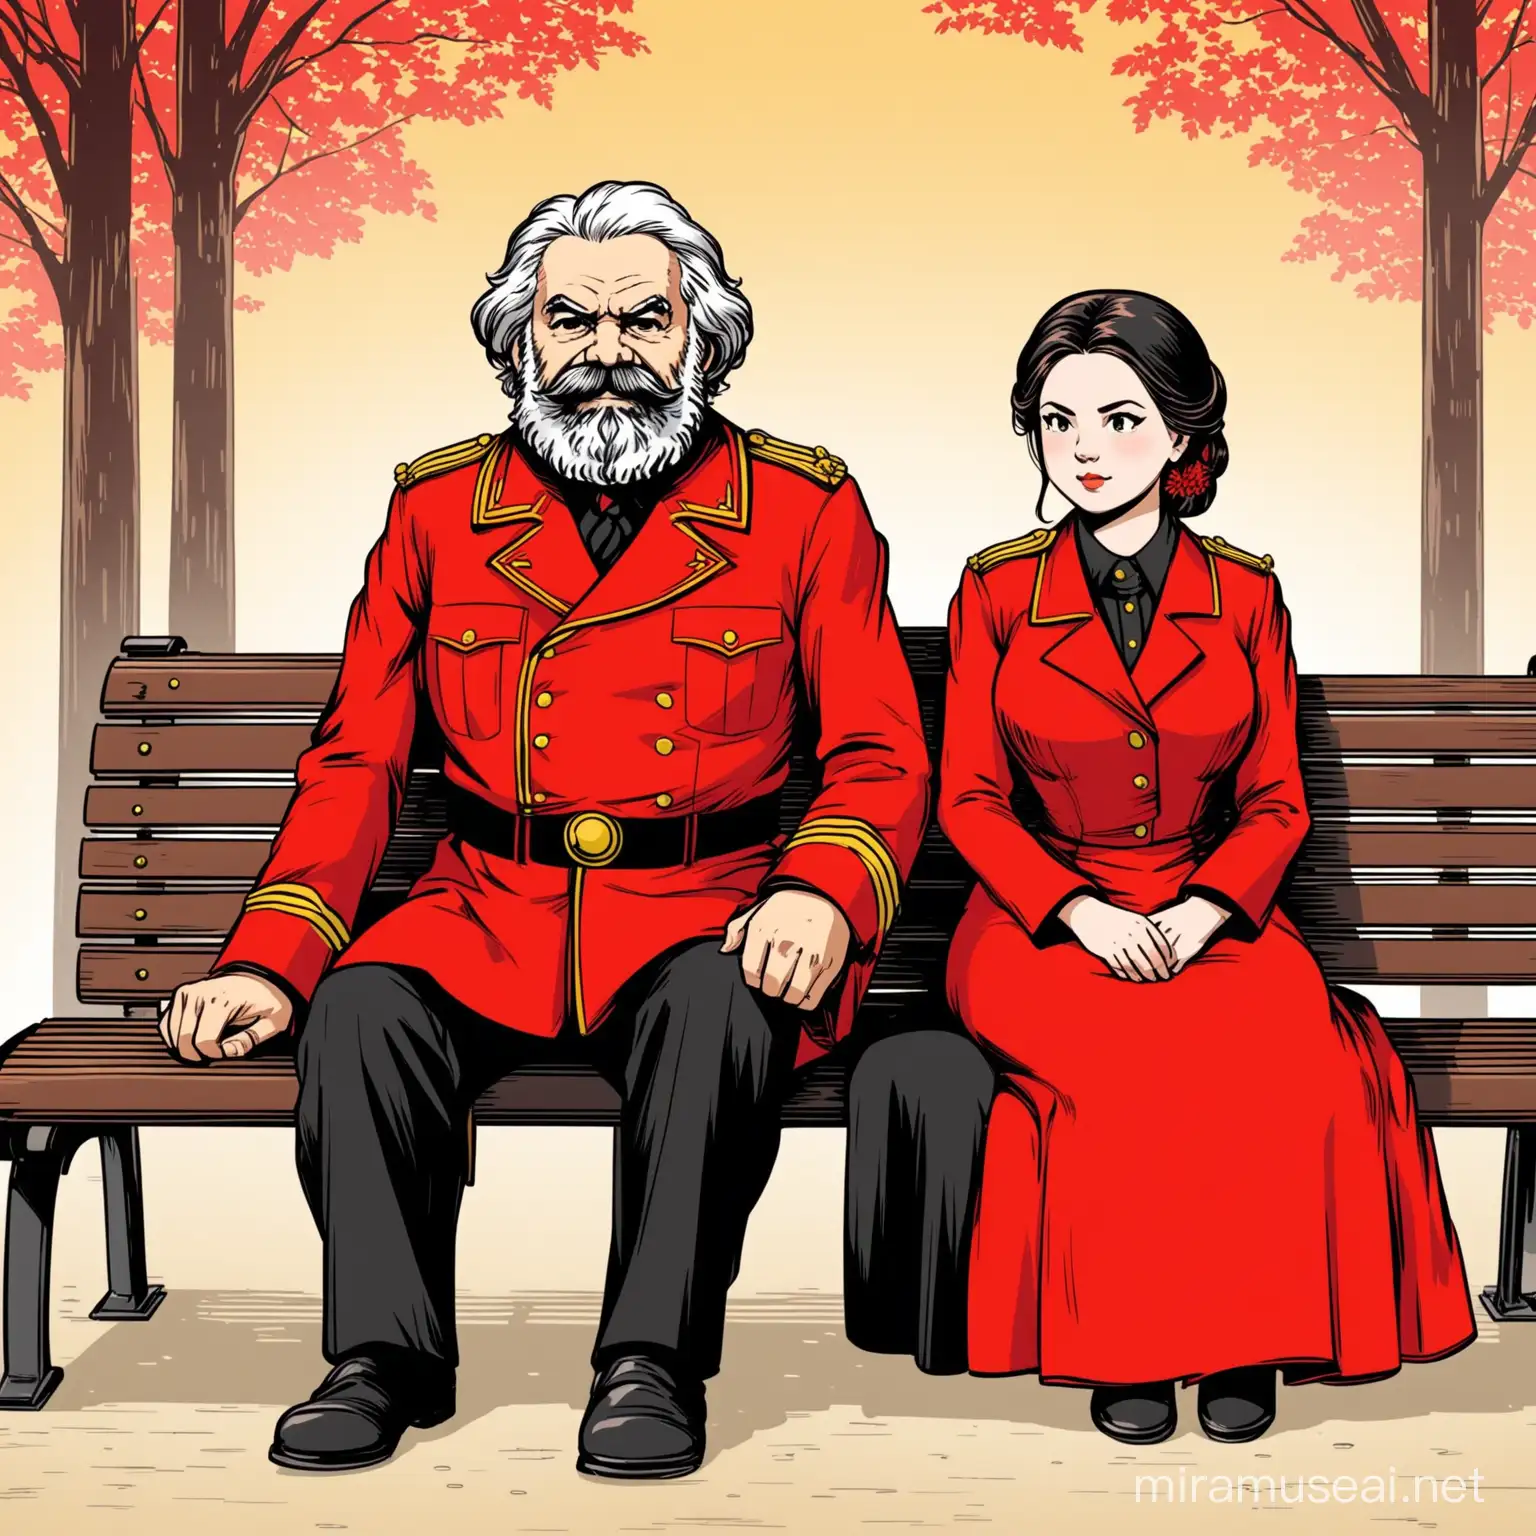 karl marx dressed in black and a woman dressed in a red jacket and Stalin, all 3 sitting on a bench color cartoon